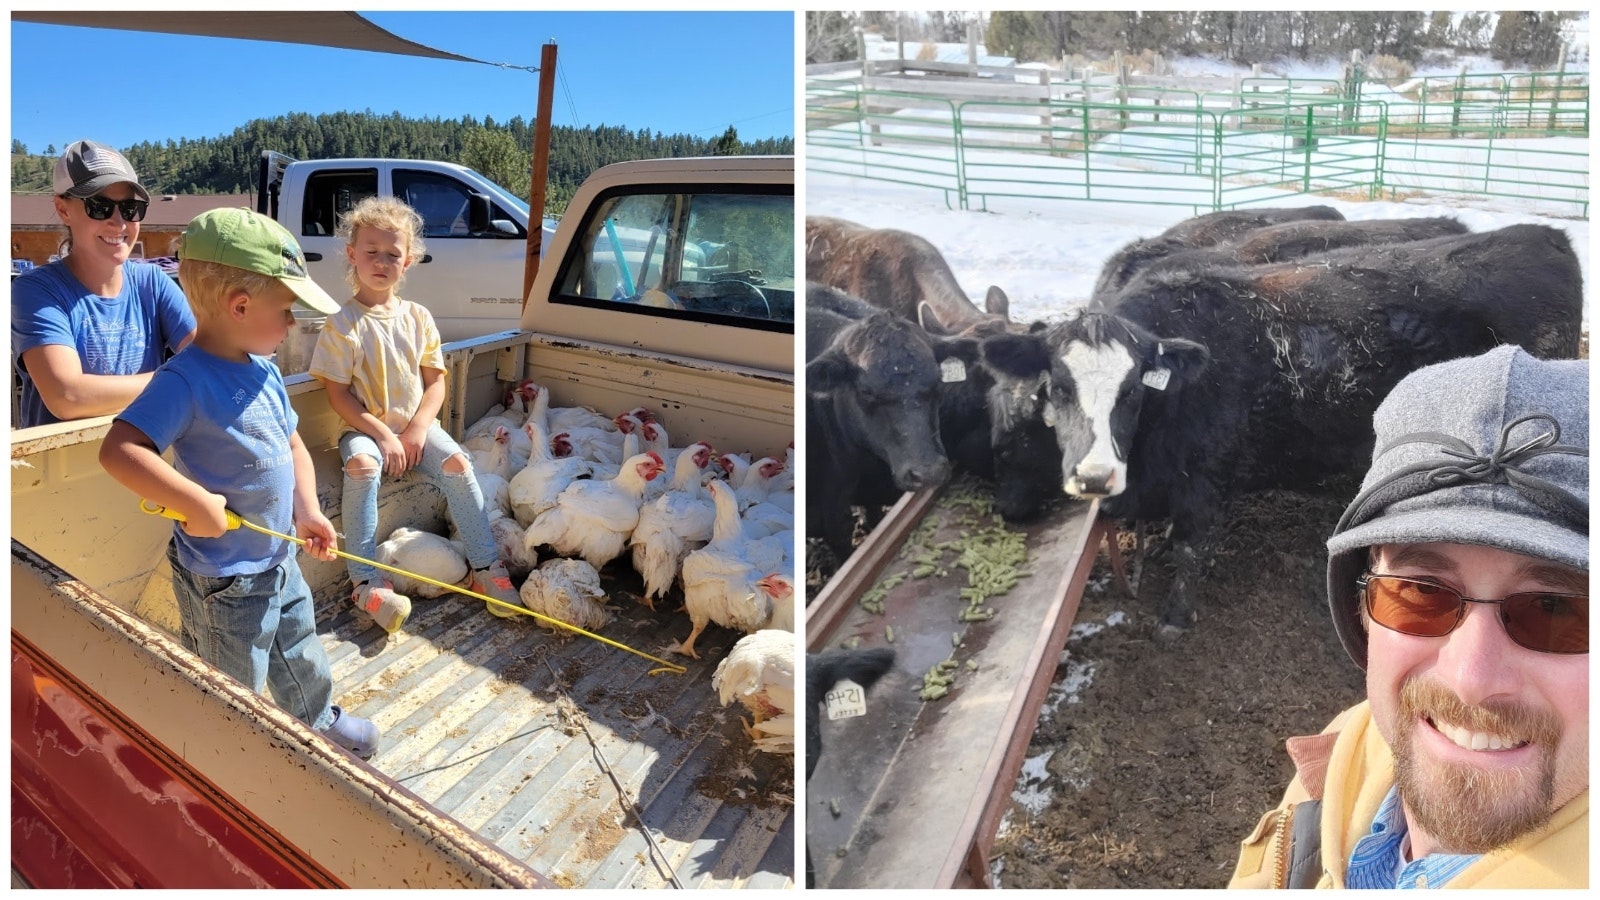 Chicken processing day at Broken Arrow Farm draws a big crowd of helpers, left. Paul Eitel raises Simmental cattle on his farm in Weston County, right.